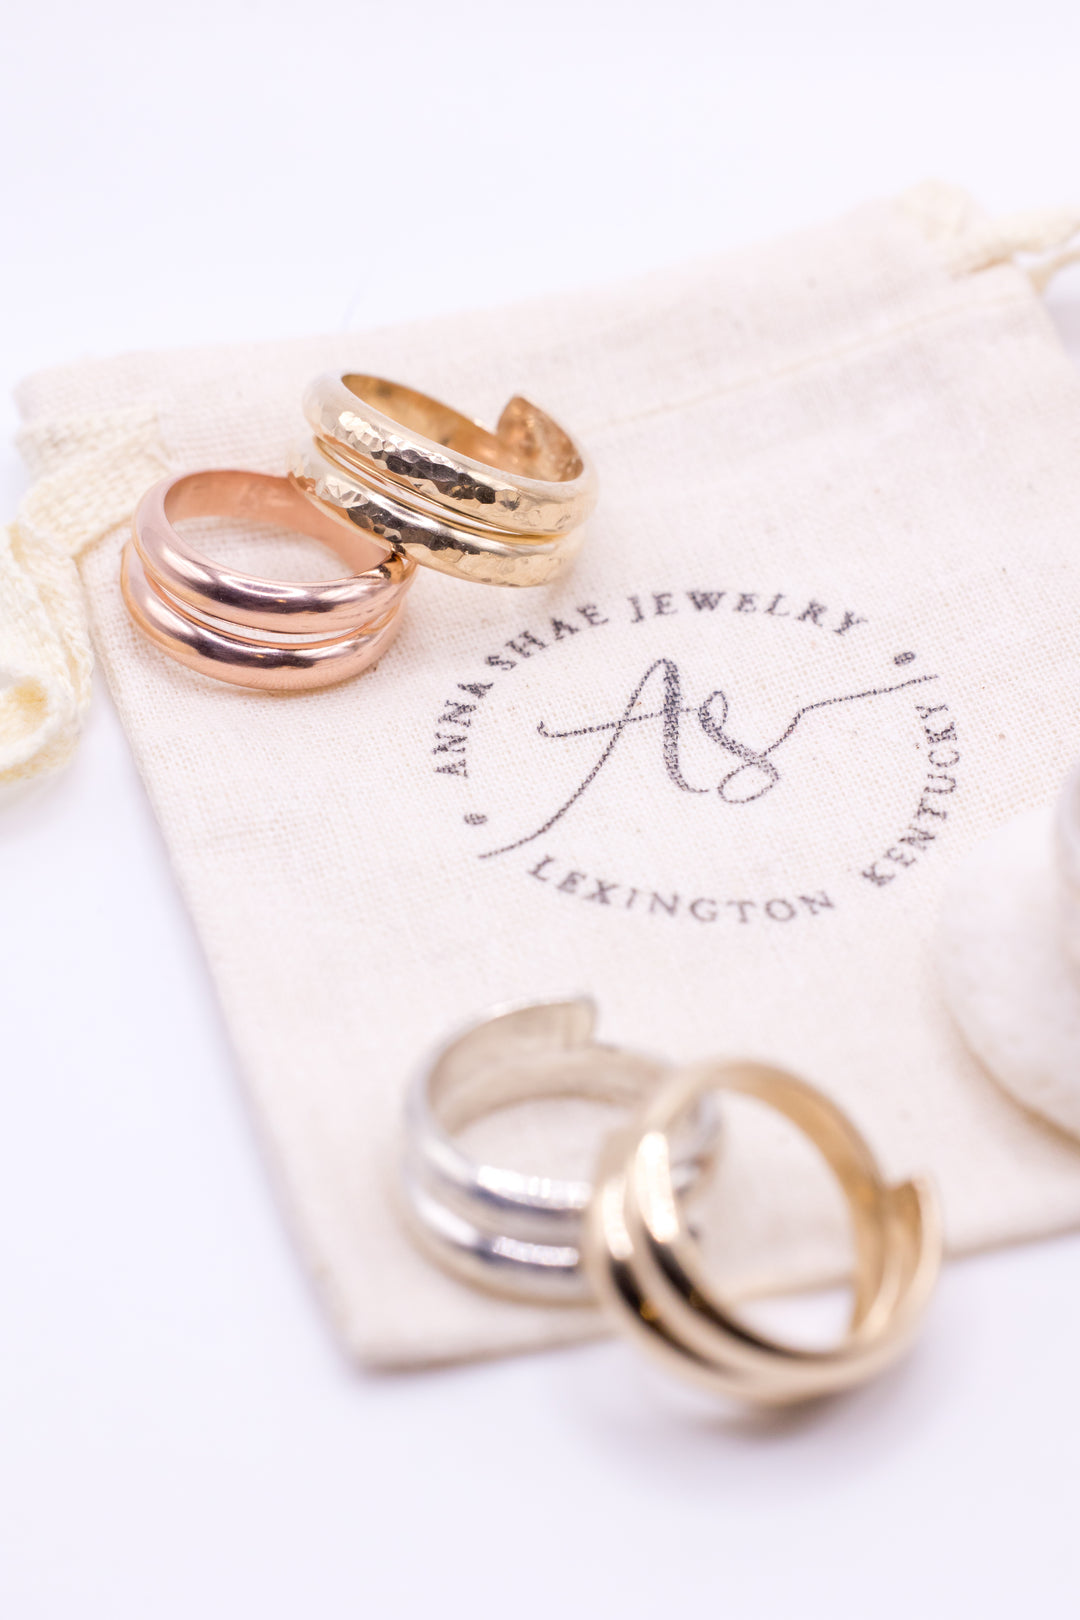 Rose Gold Wrap Rings in Lexington, Kentucky by Anna Shae Jewelry 